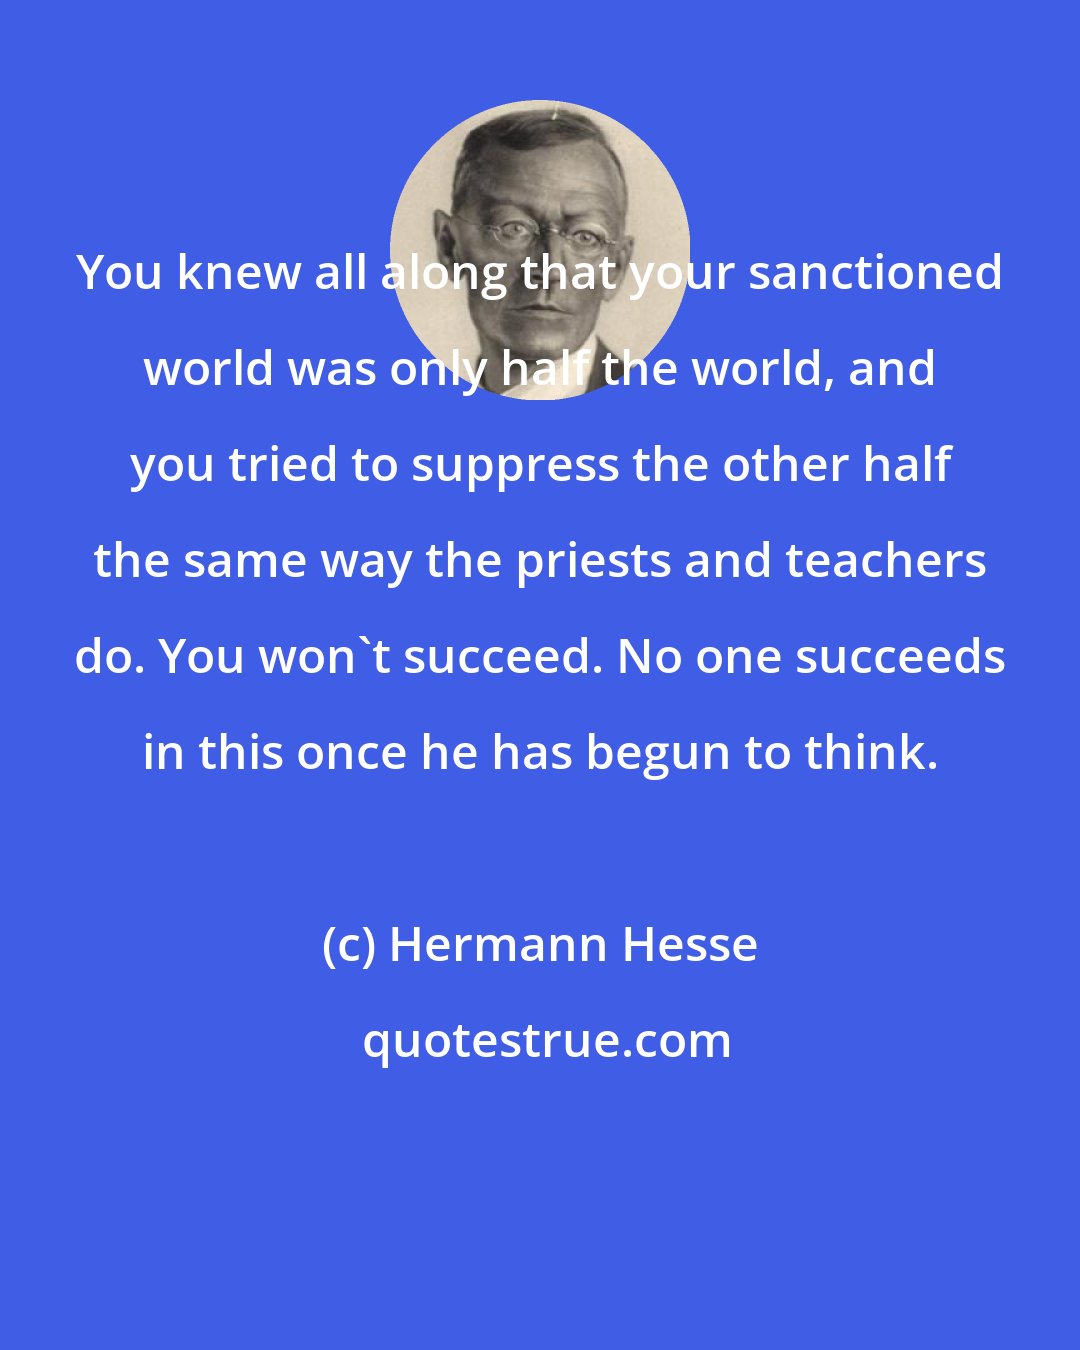 Hermann Hesse: You knew all along that your sanctioned world was only half the world, and you tried to suppress the other half the same way the priests and teachers do. You won't succeed. No one succeeds in this once he has begun to think.